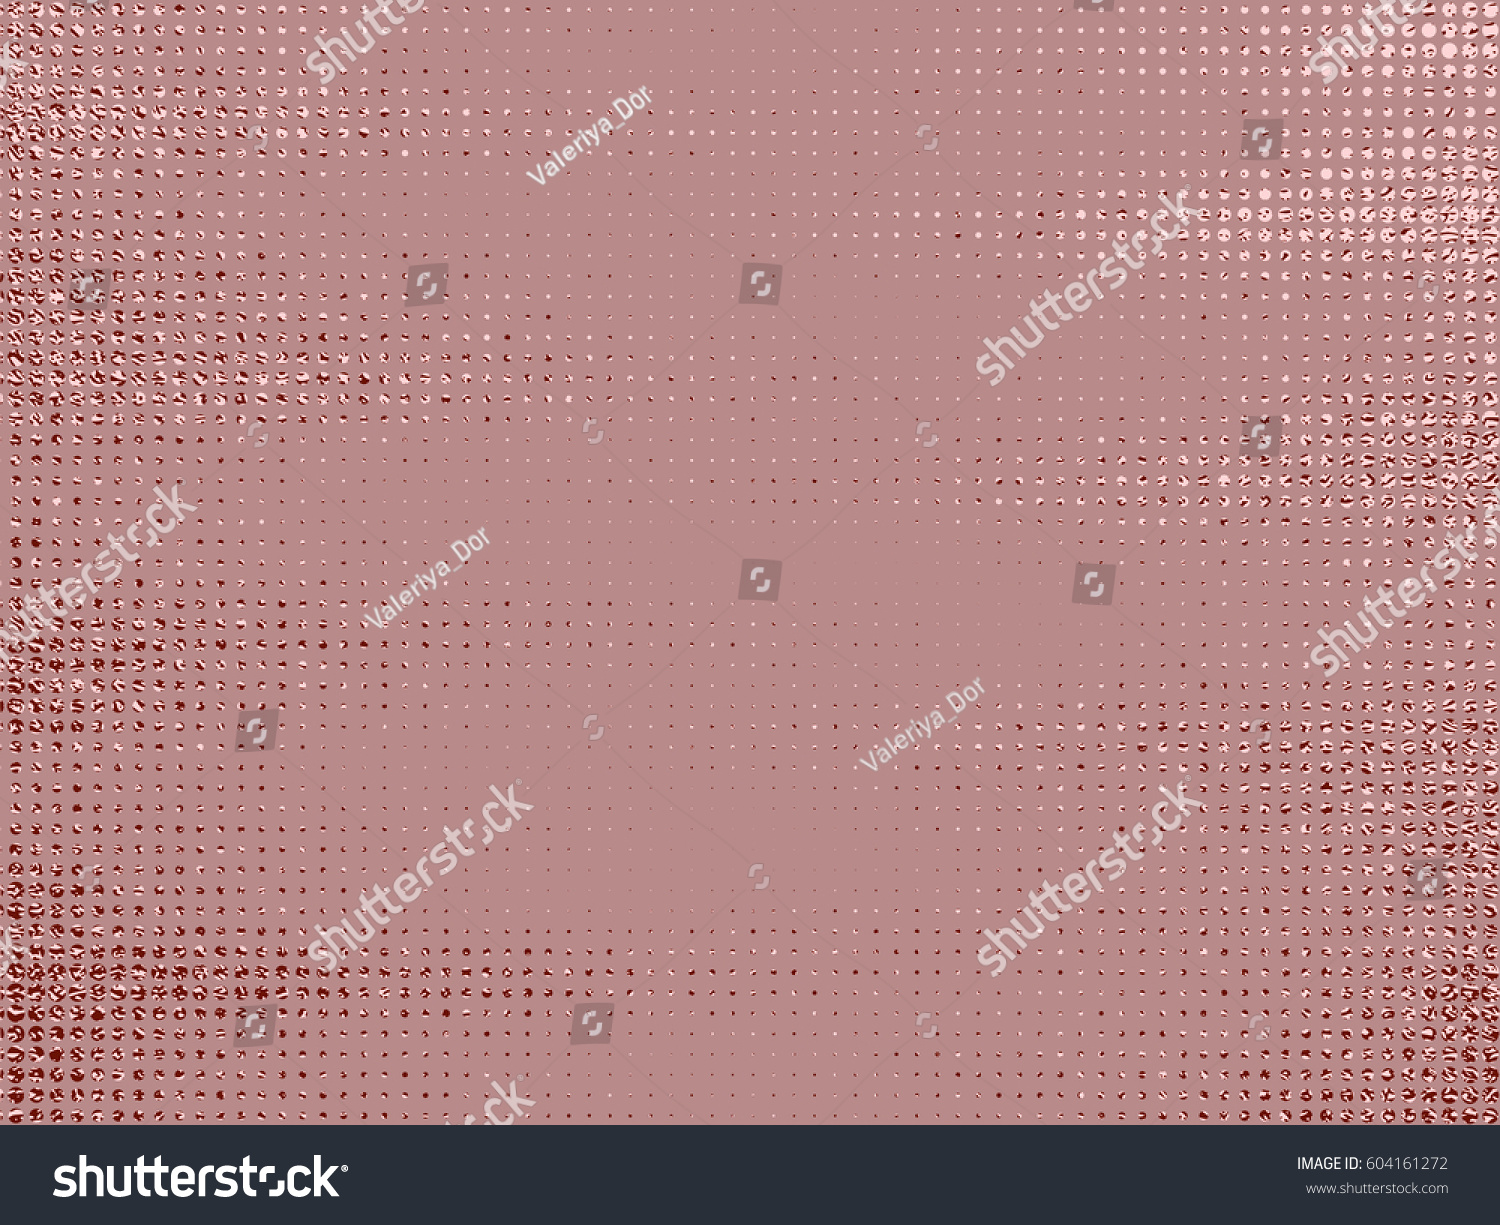 SVG of Gold Metallic glossy texture. Rose quartz pattern. Abstract shiny background. Luxury sparkling background. Trendy template for holiday designs, party, birthday, wedding, invitation, web, banner card svg